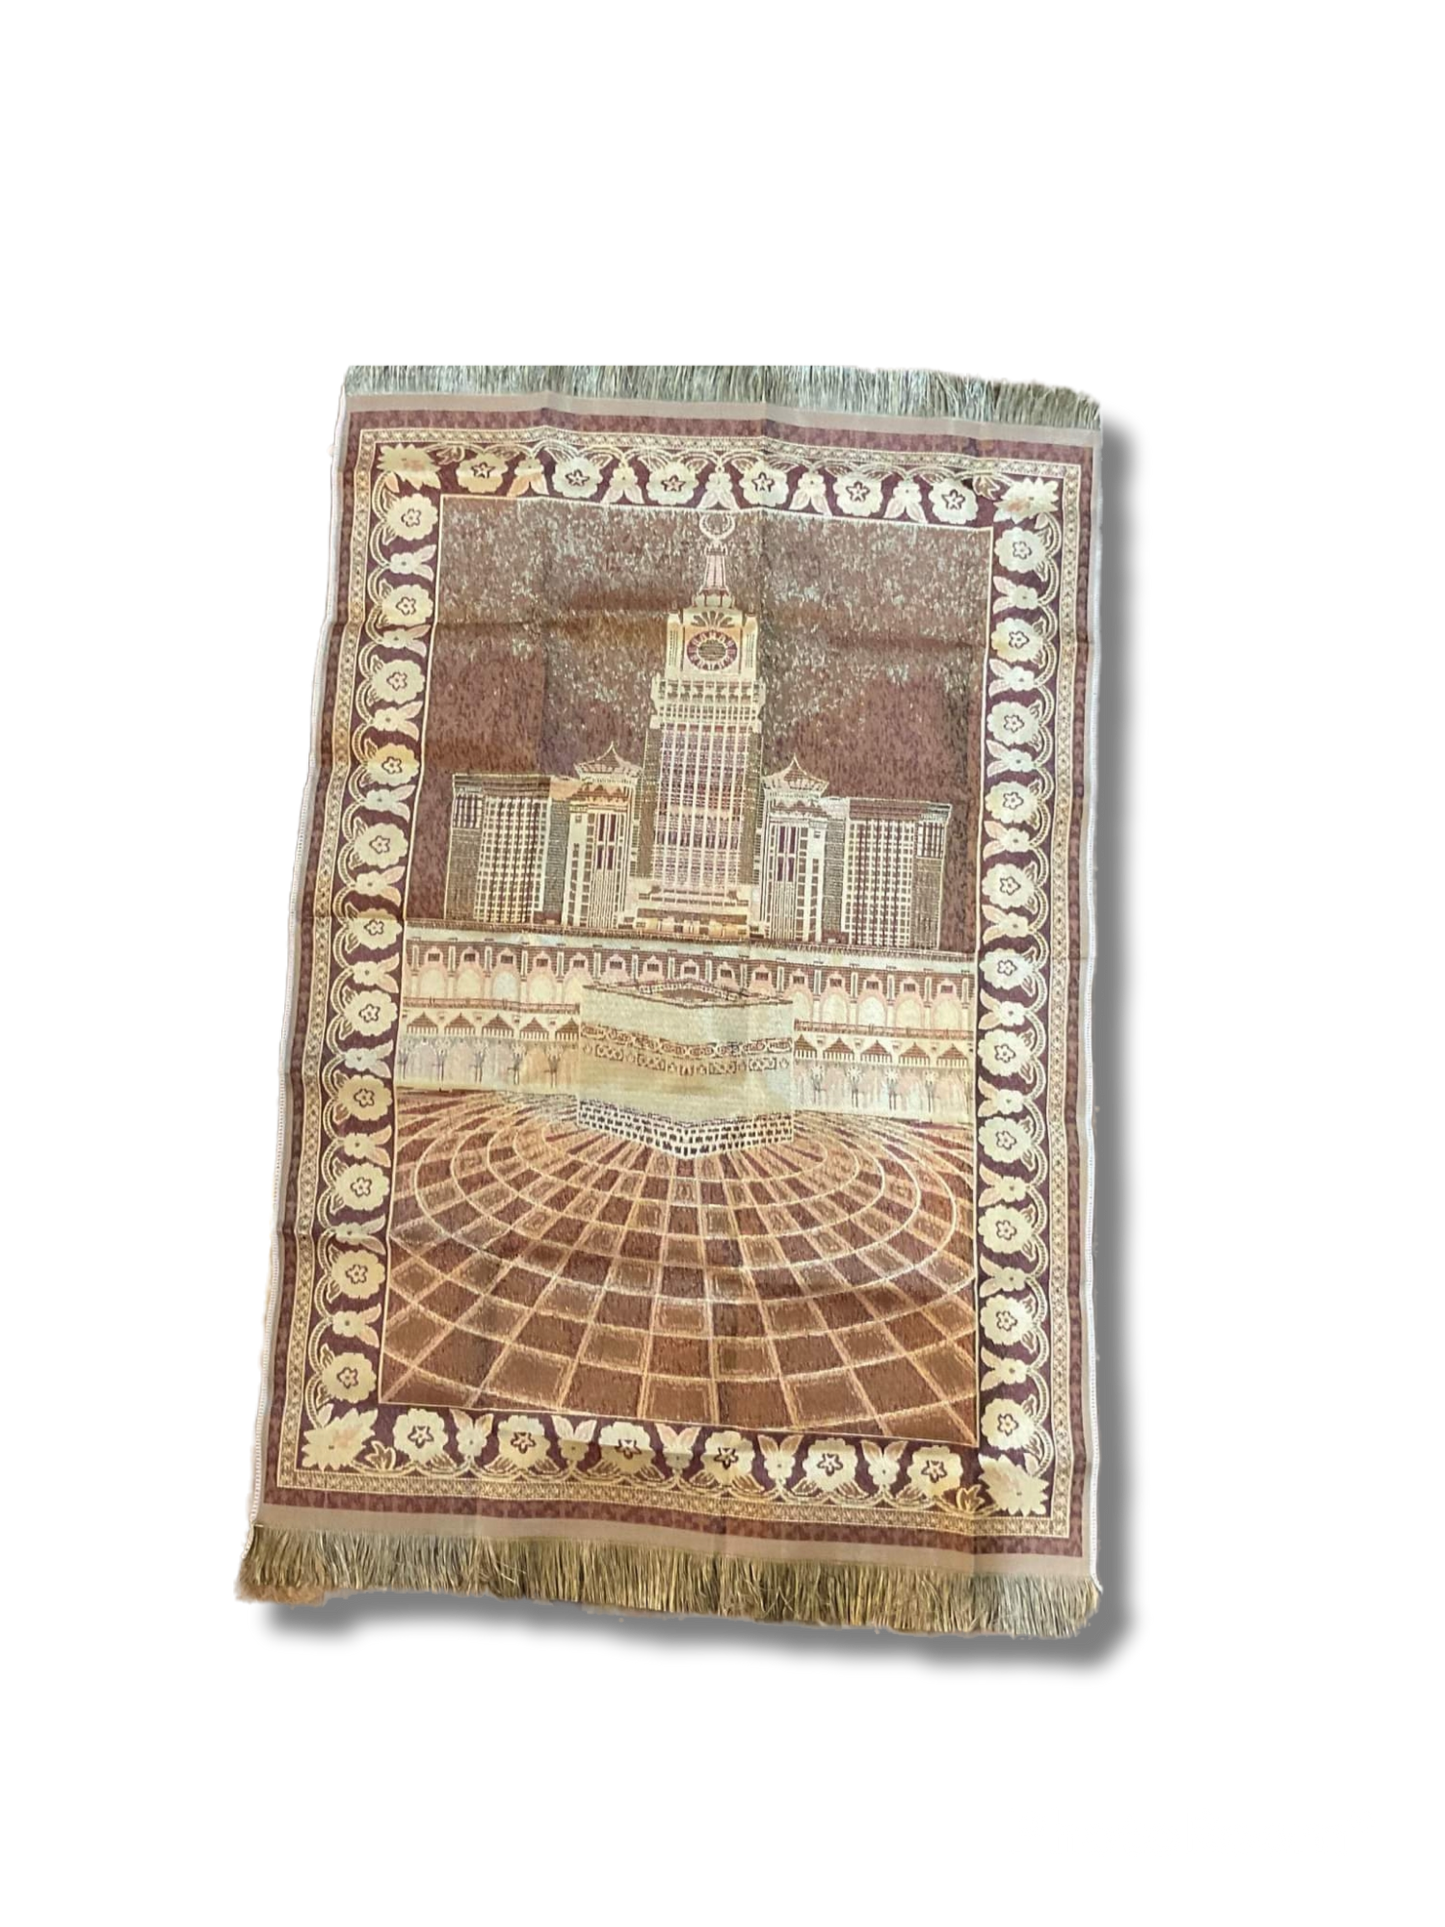 Prayer Bag for Muslim Easy to Carry, the bag has a prayer mat,  Style Mecca clock rug. Middle Eastern Boutique